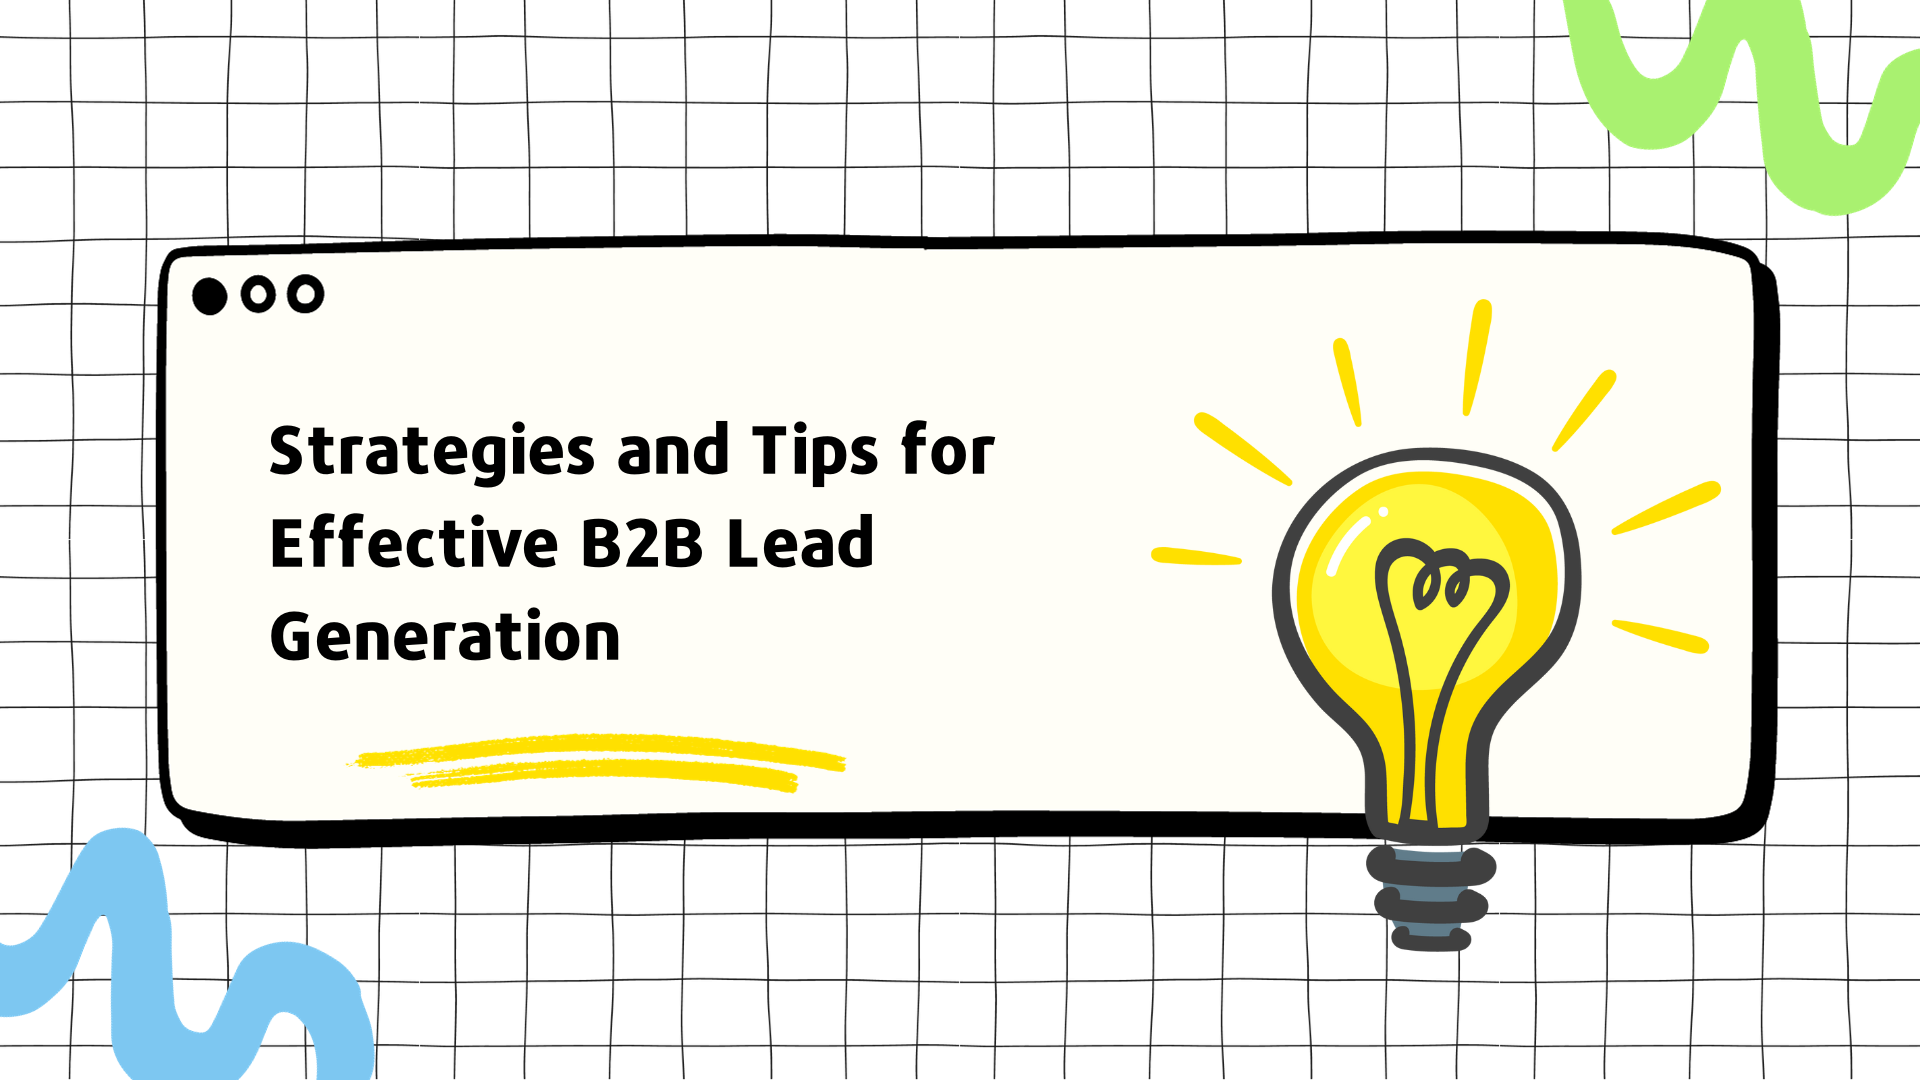 Strategies and Tips for Effective B2B Lead Generation